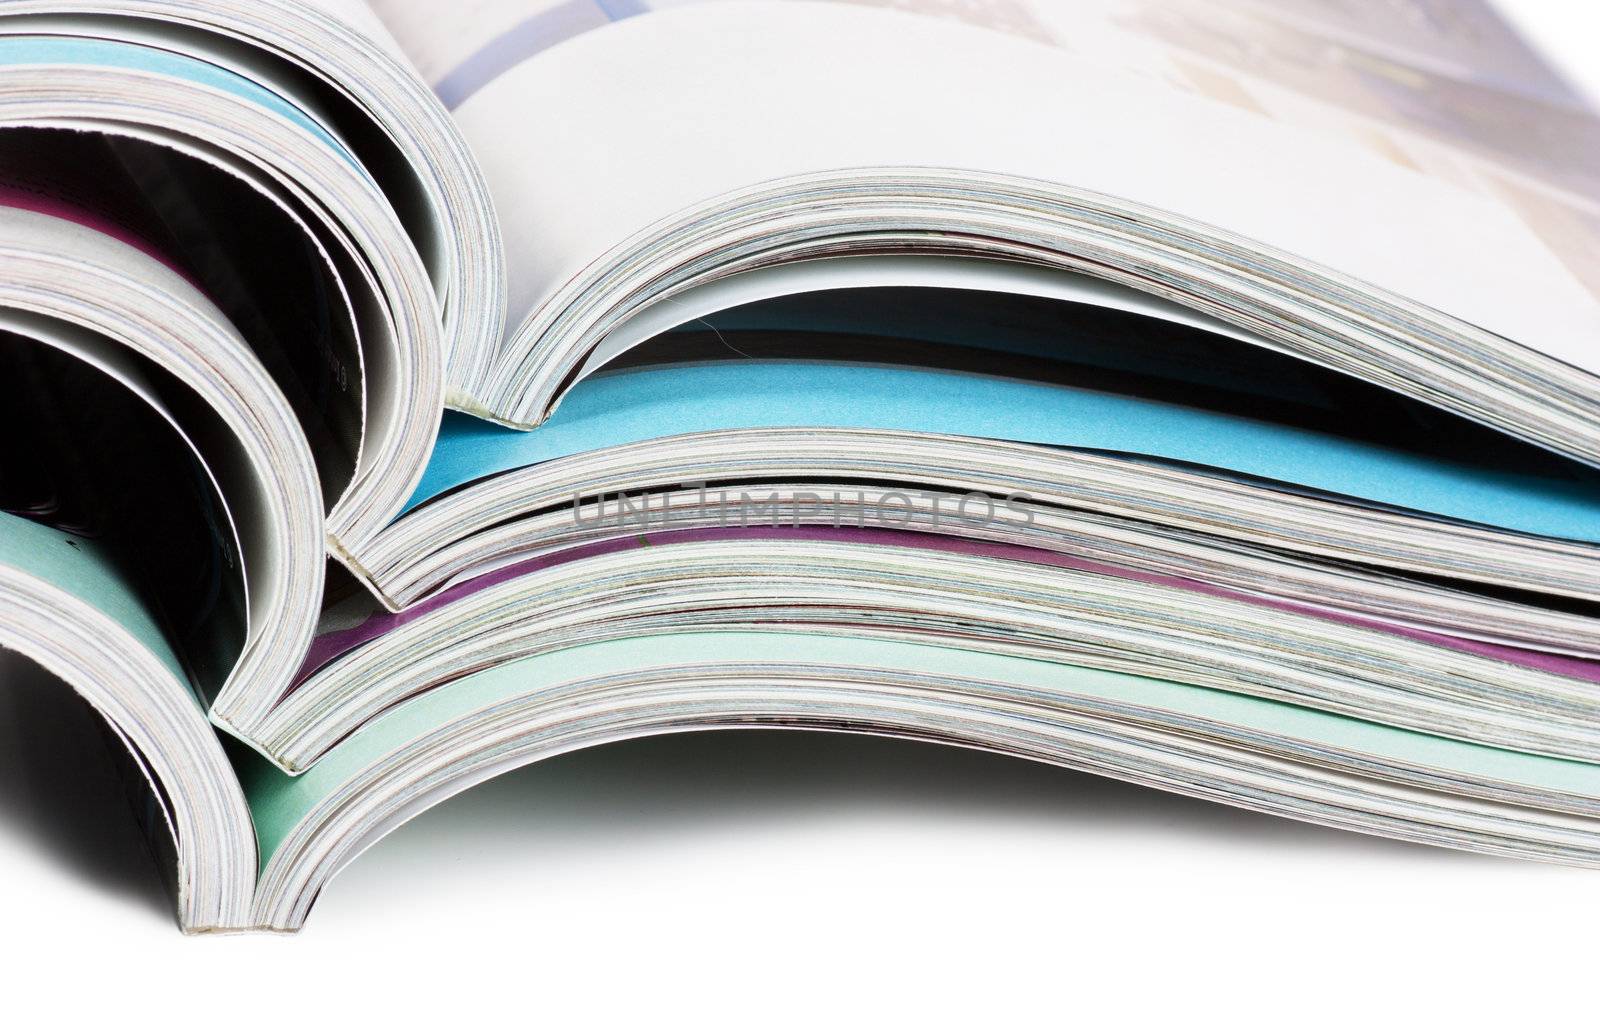 Selective focus image of a stack of magazines